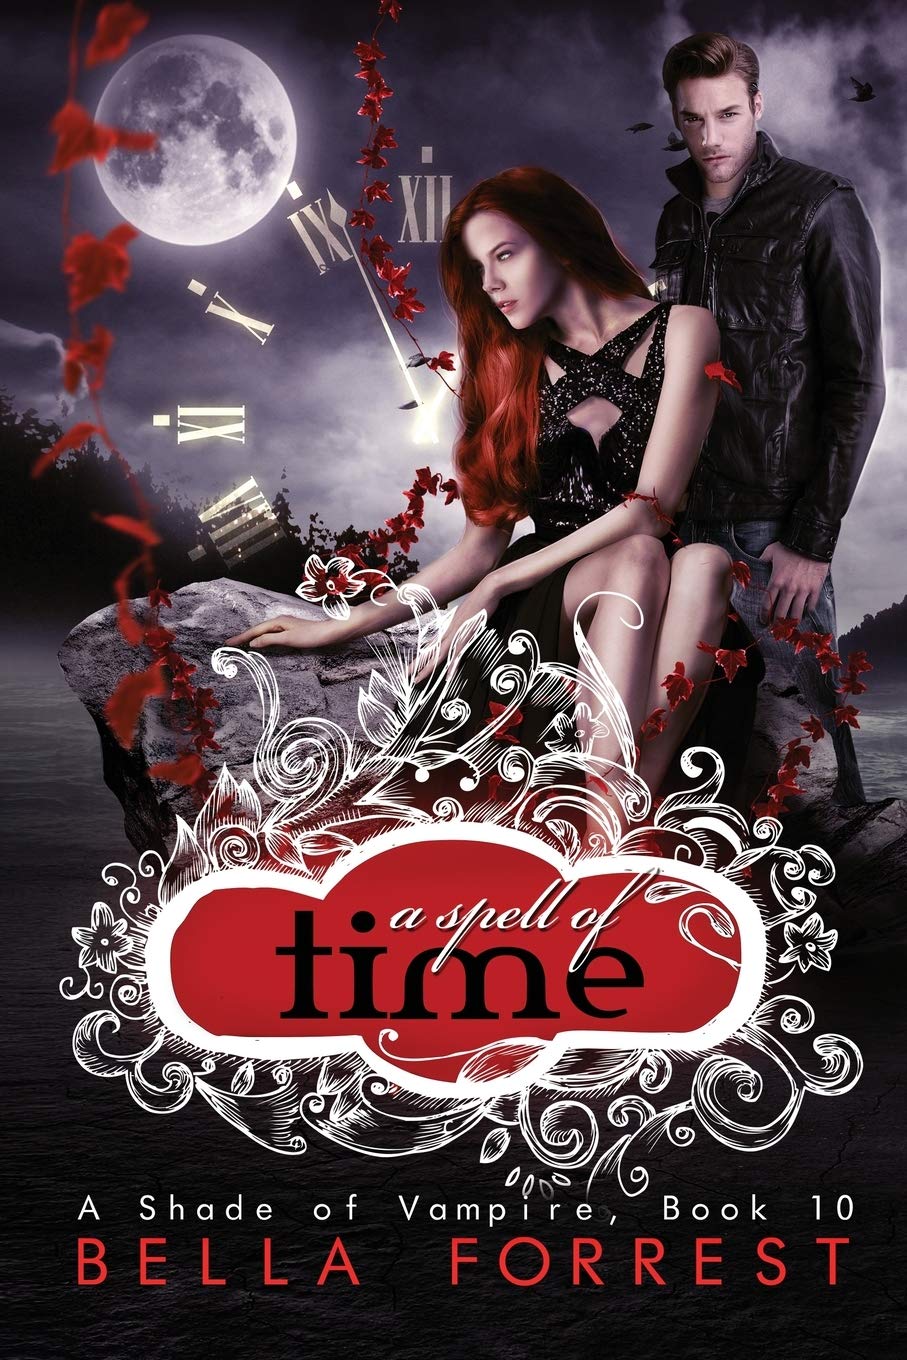 Livre ISBN 1507840012 A Shade Of Vampire # 10 : A Spell of Time (Bella Forrest)